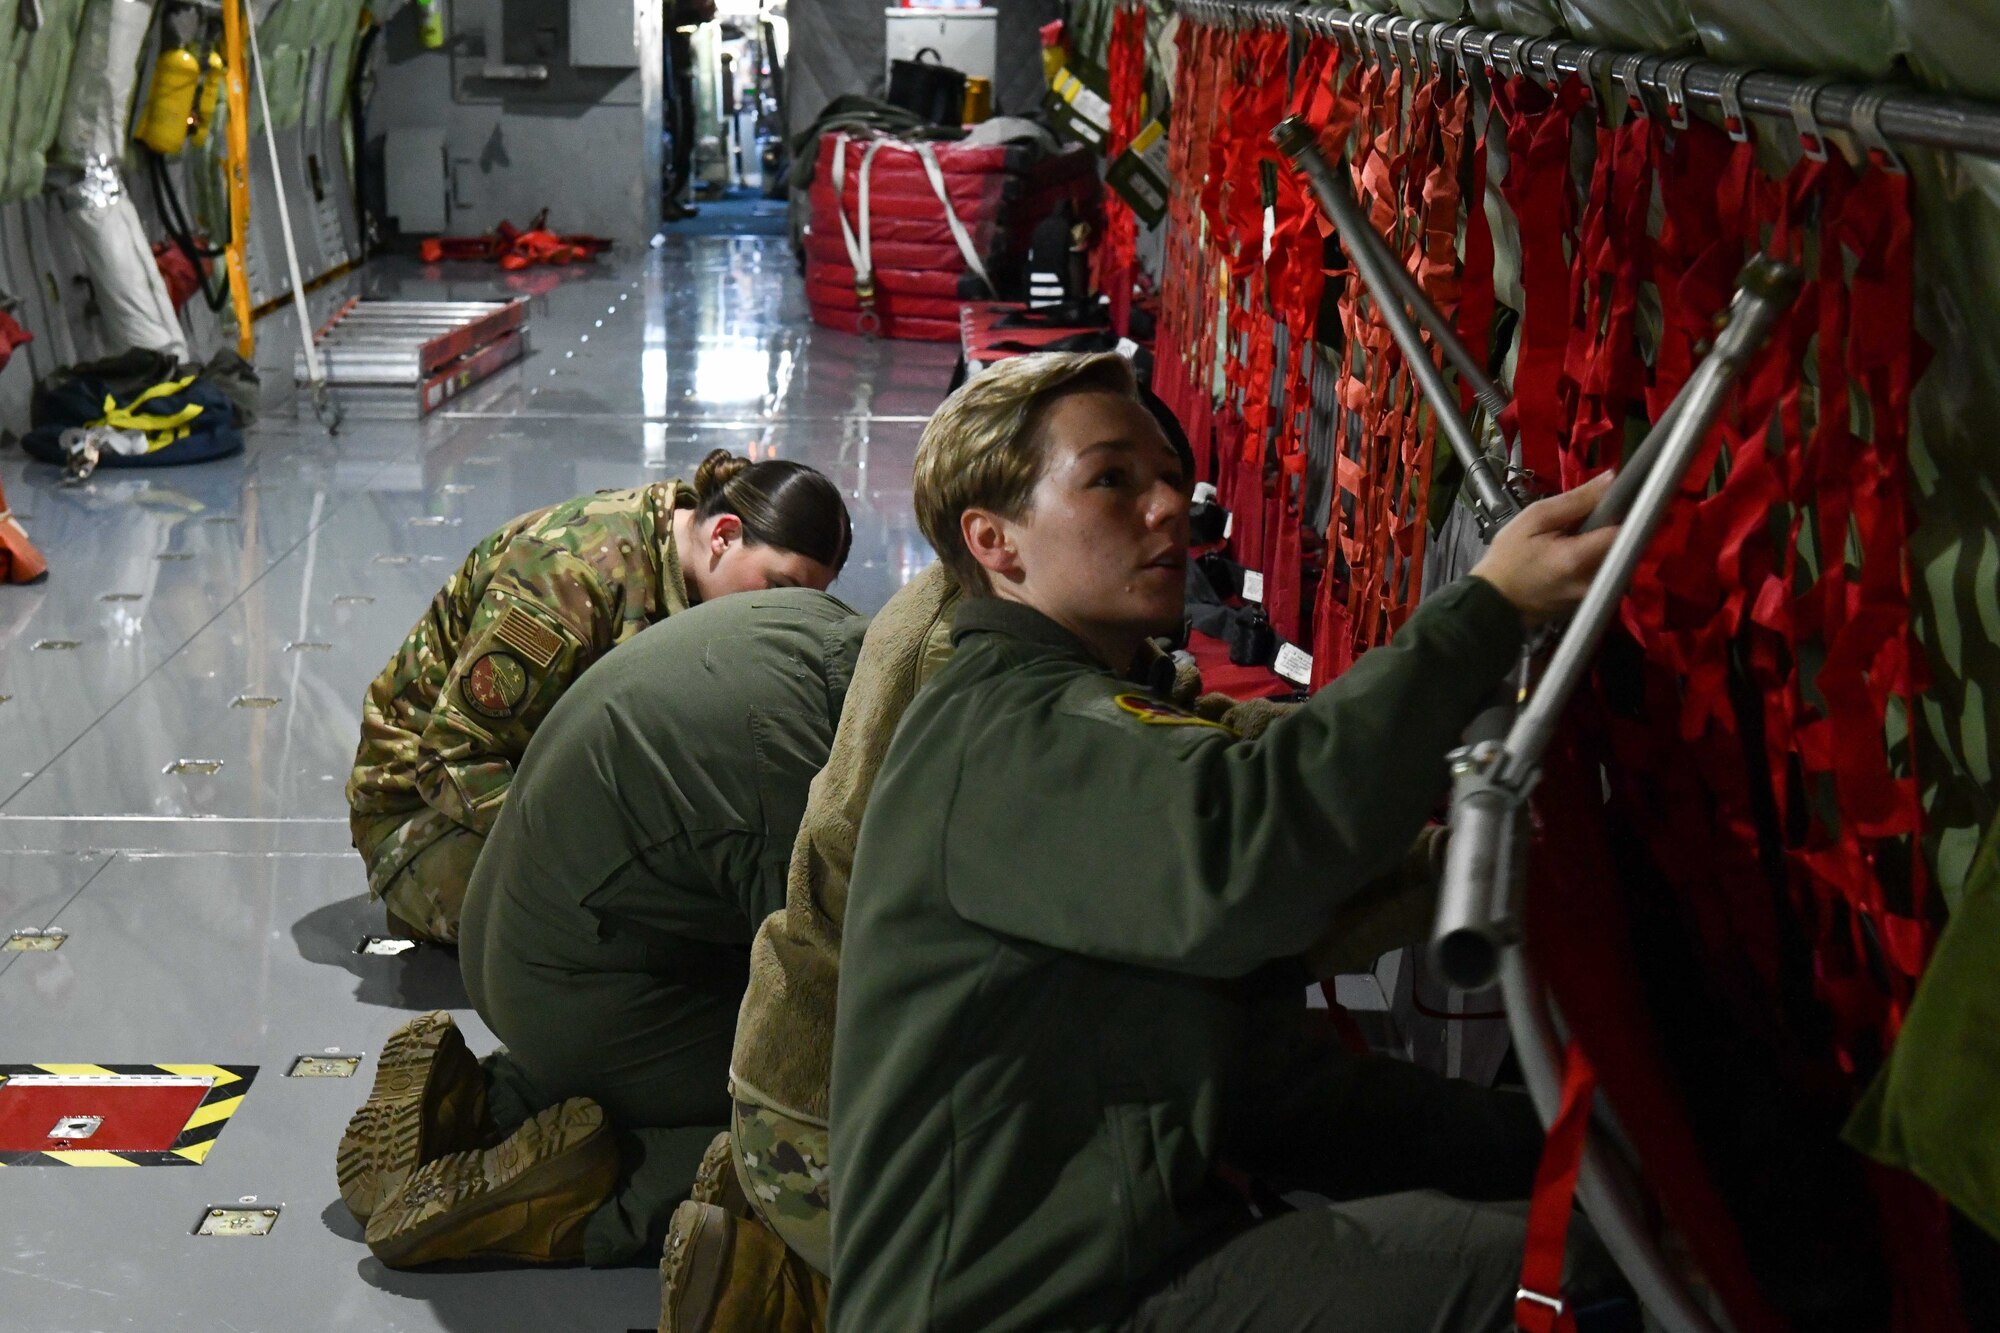 Airmen from the 54th Air Refueling Squadron set up seating on a KC-135 Stratotanker prior to a flight at Altus Air Force Base, Oklahoma, March 28, 2023. The KC-135 is capable of aerial refueling and transport of passengers and cargo. (U.S. Air force photo by Airman 1st Class Miyah Gray)